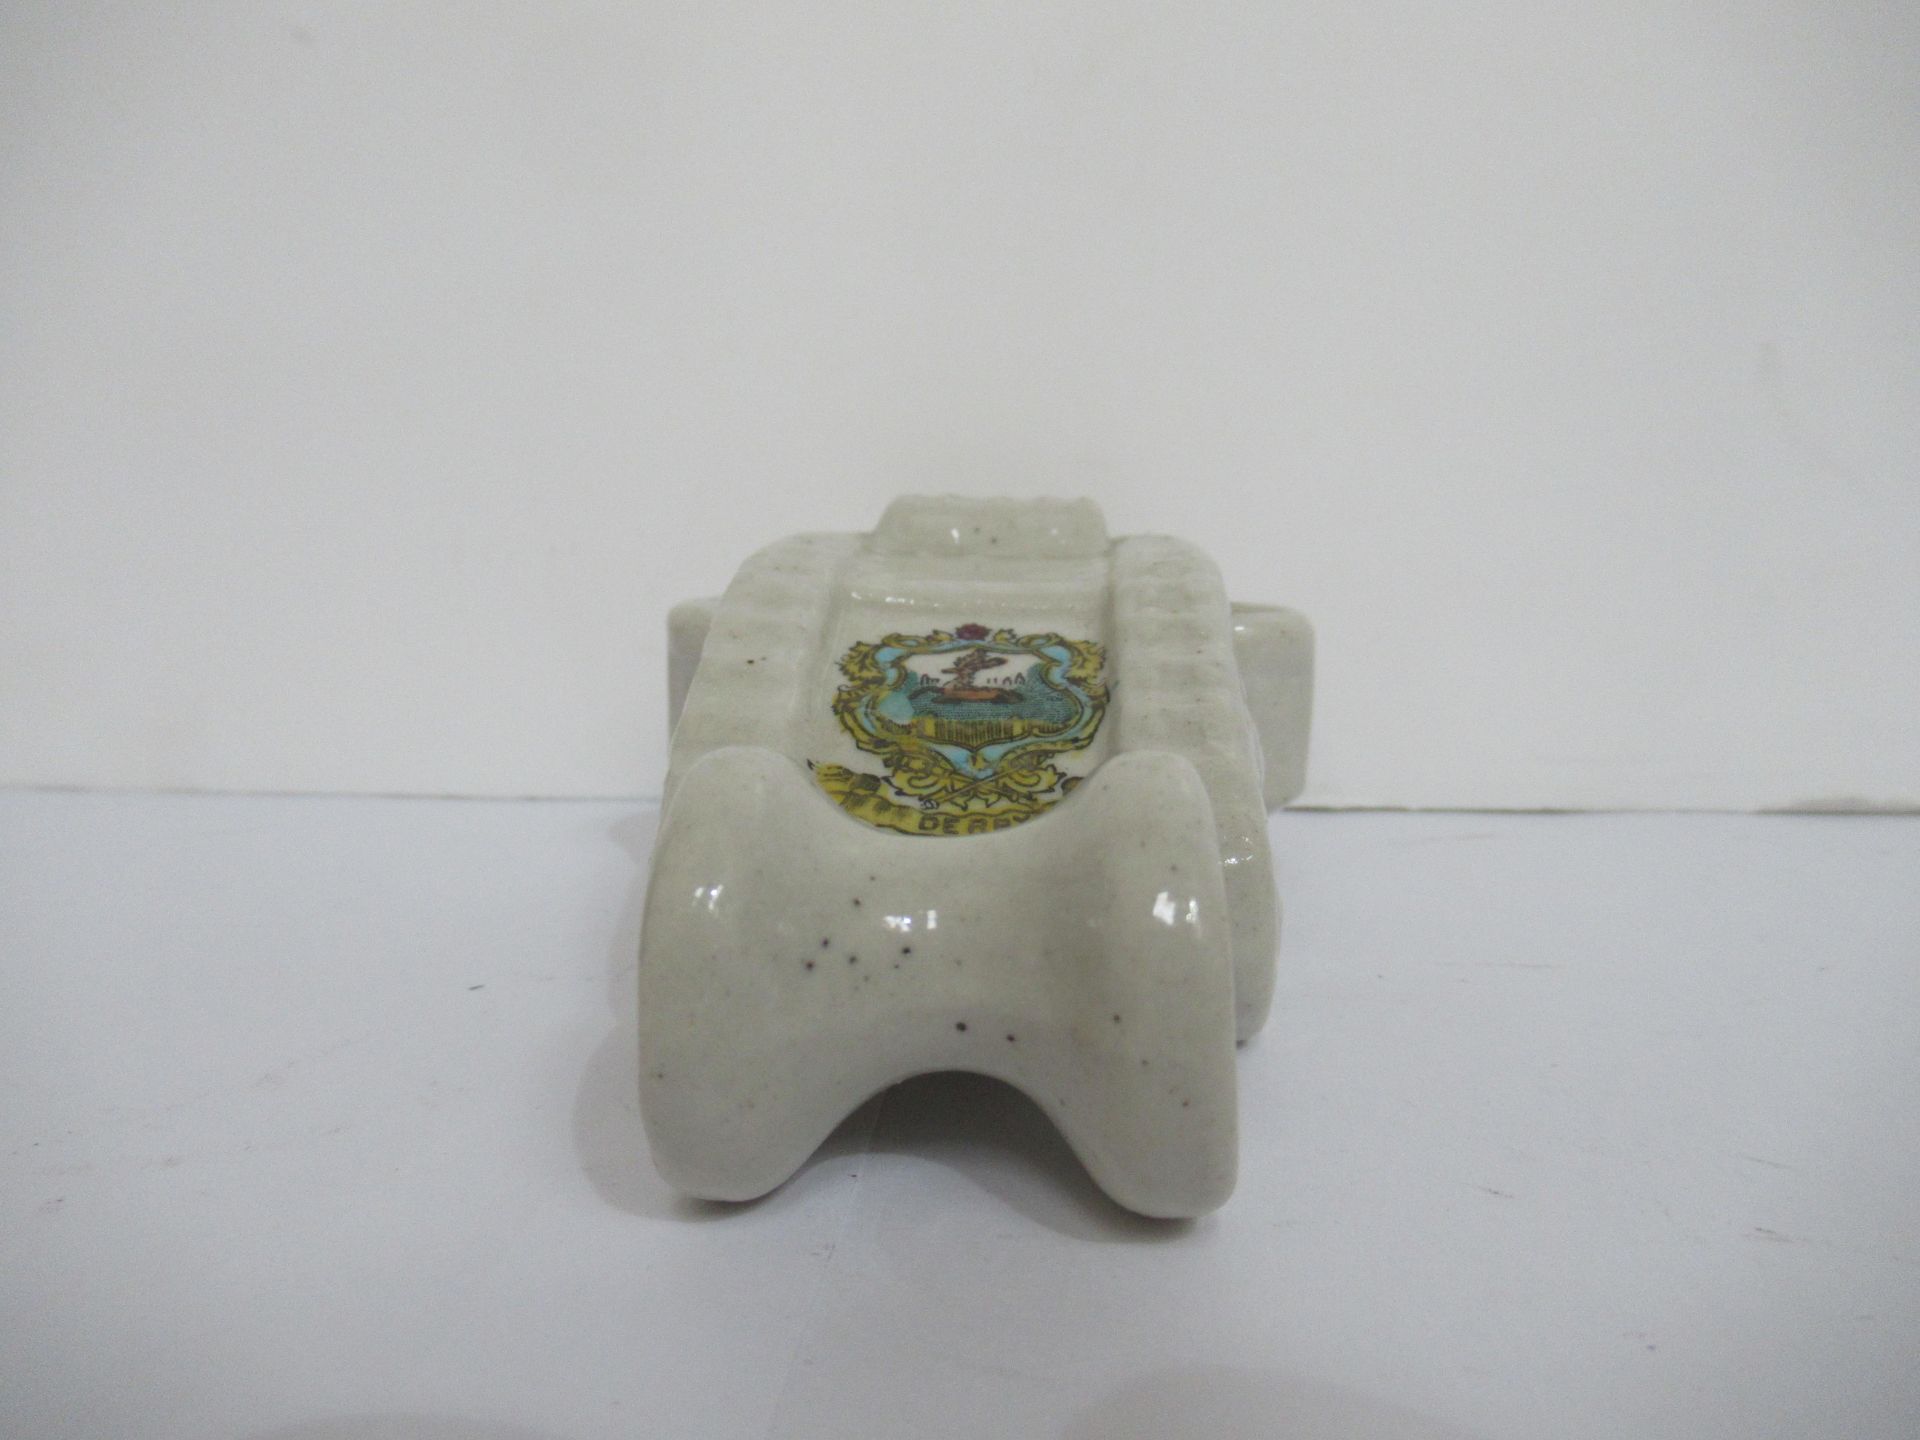 Crested China Willow art 'model of British Tank' with Derby coat of arms (130mm x 75mm) - Image 4 of 10